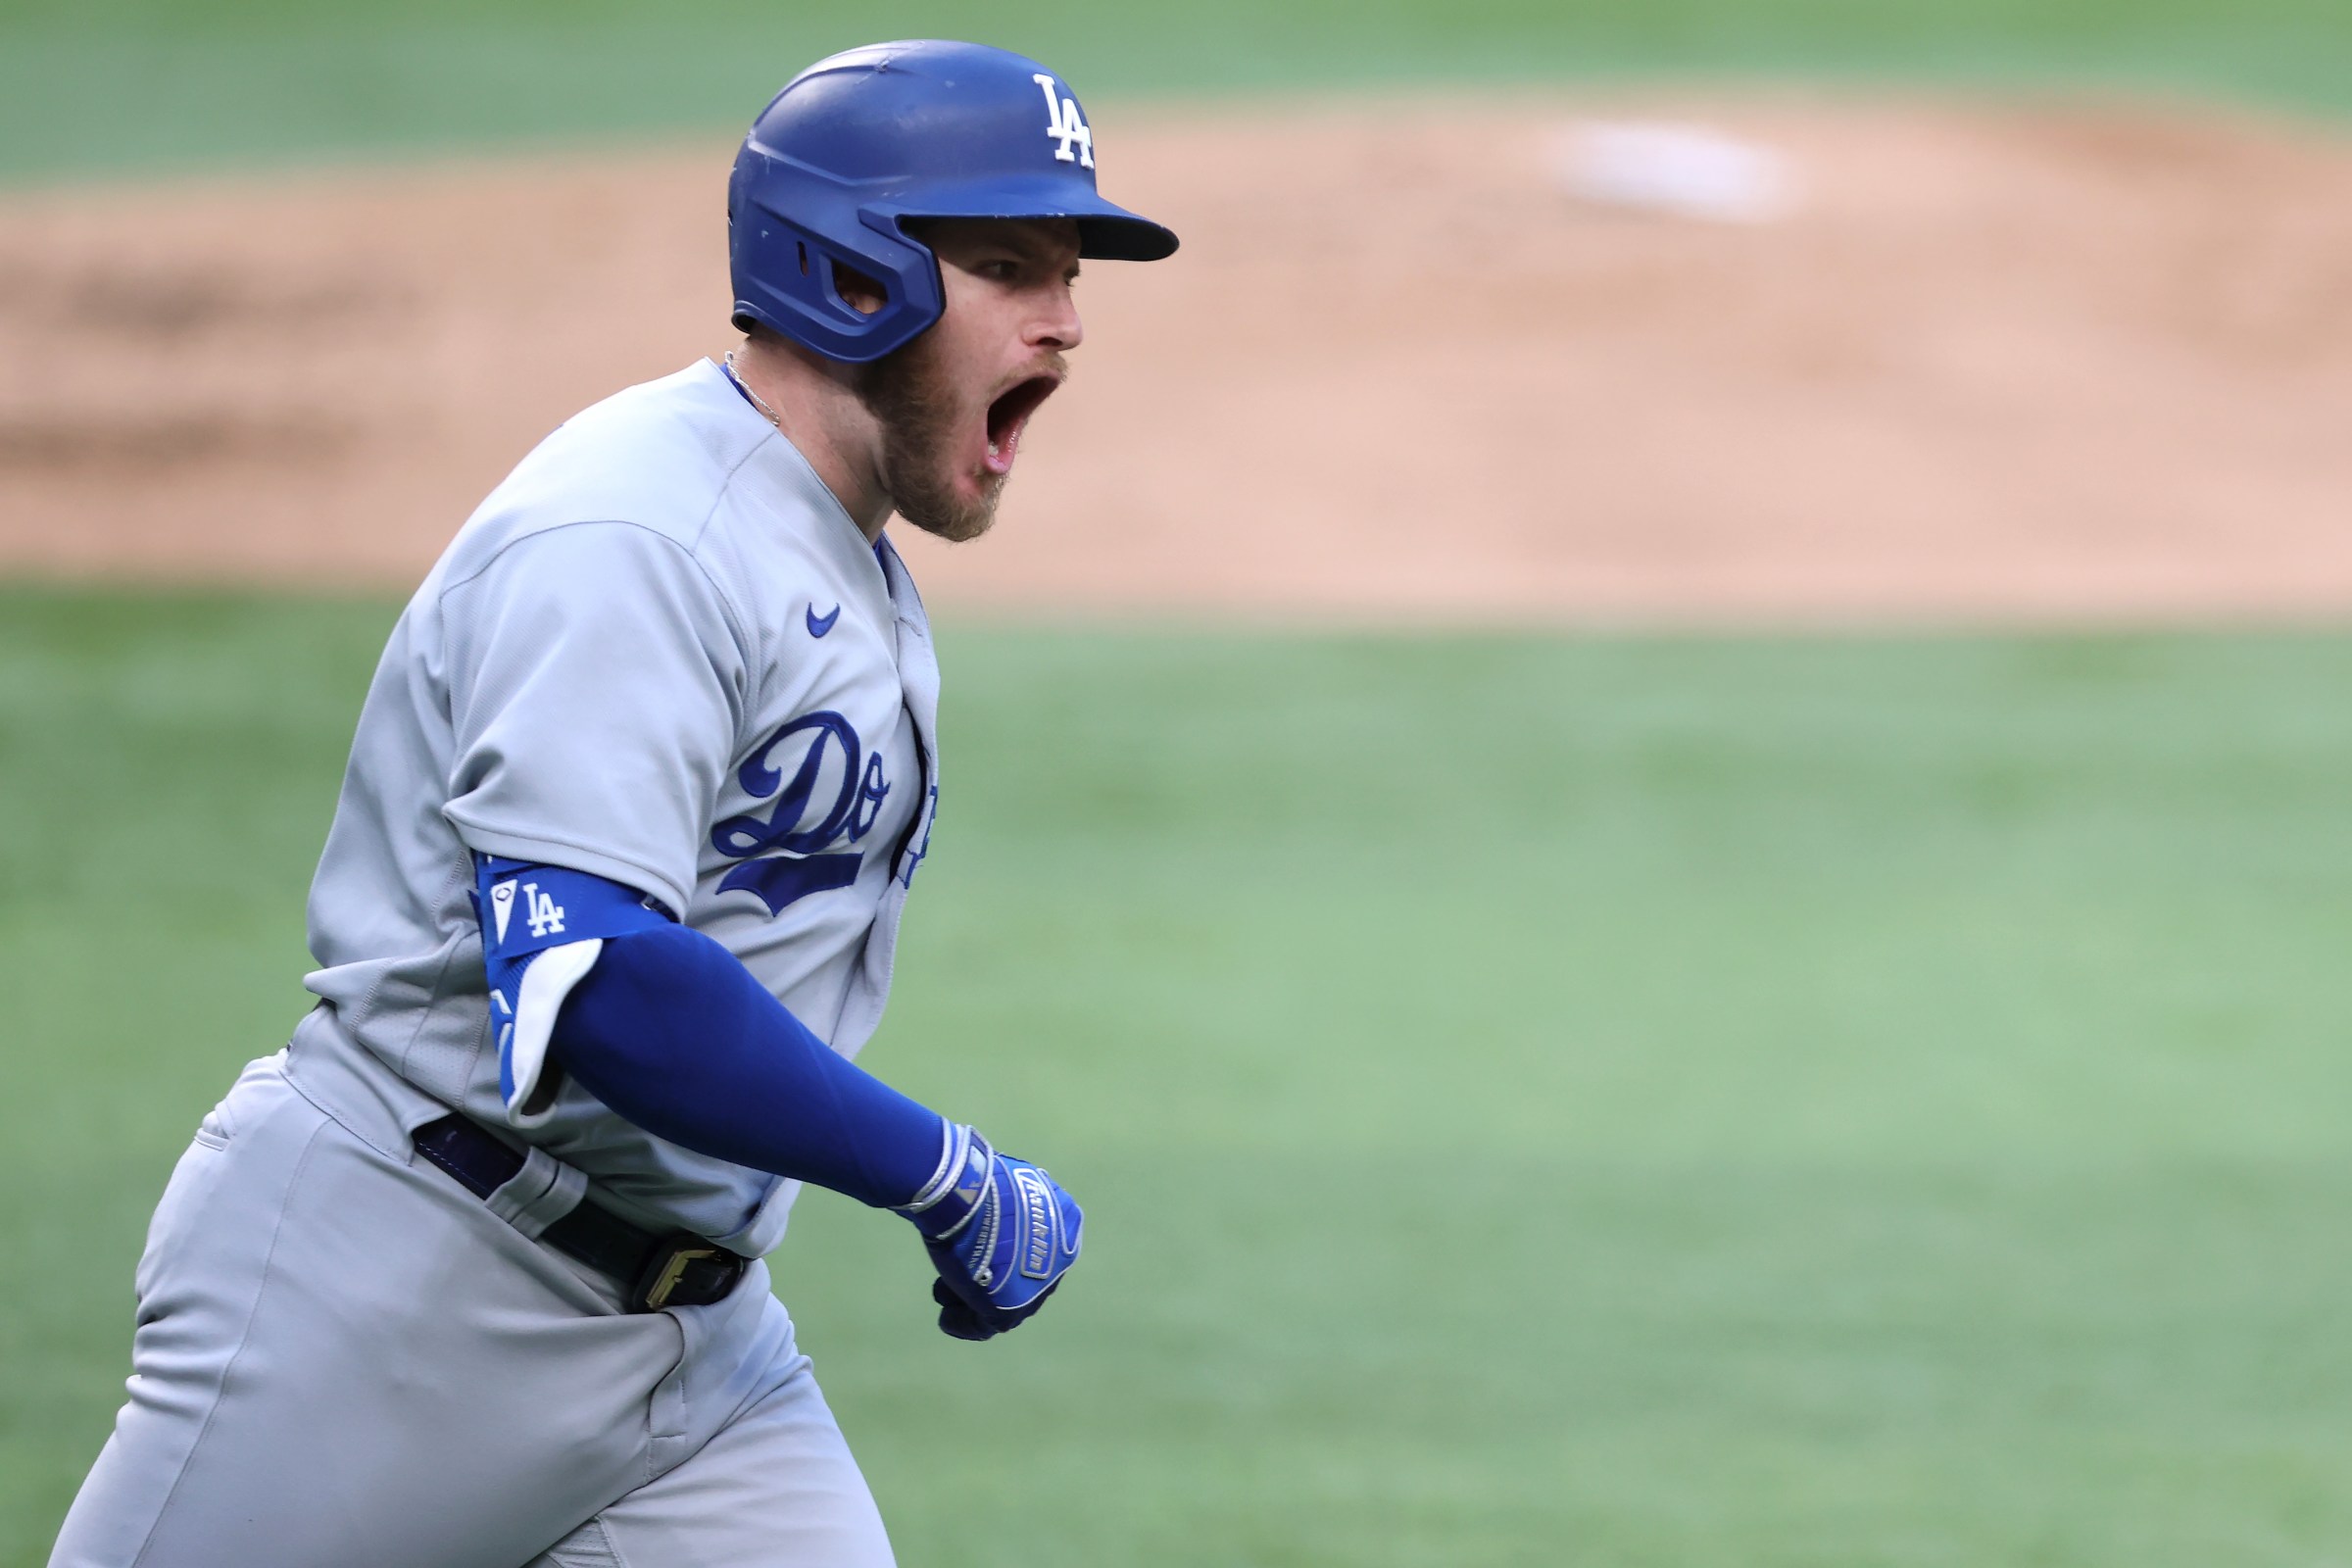 Max Muncy of the Dodgers celebrates a grand slam in Game 3 of the NLCS.